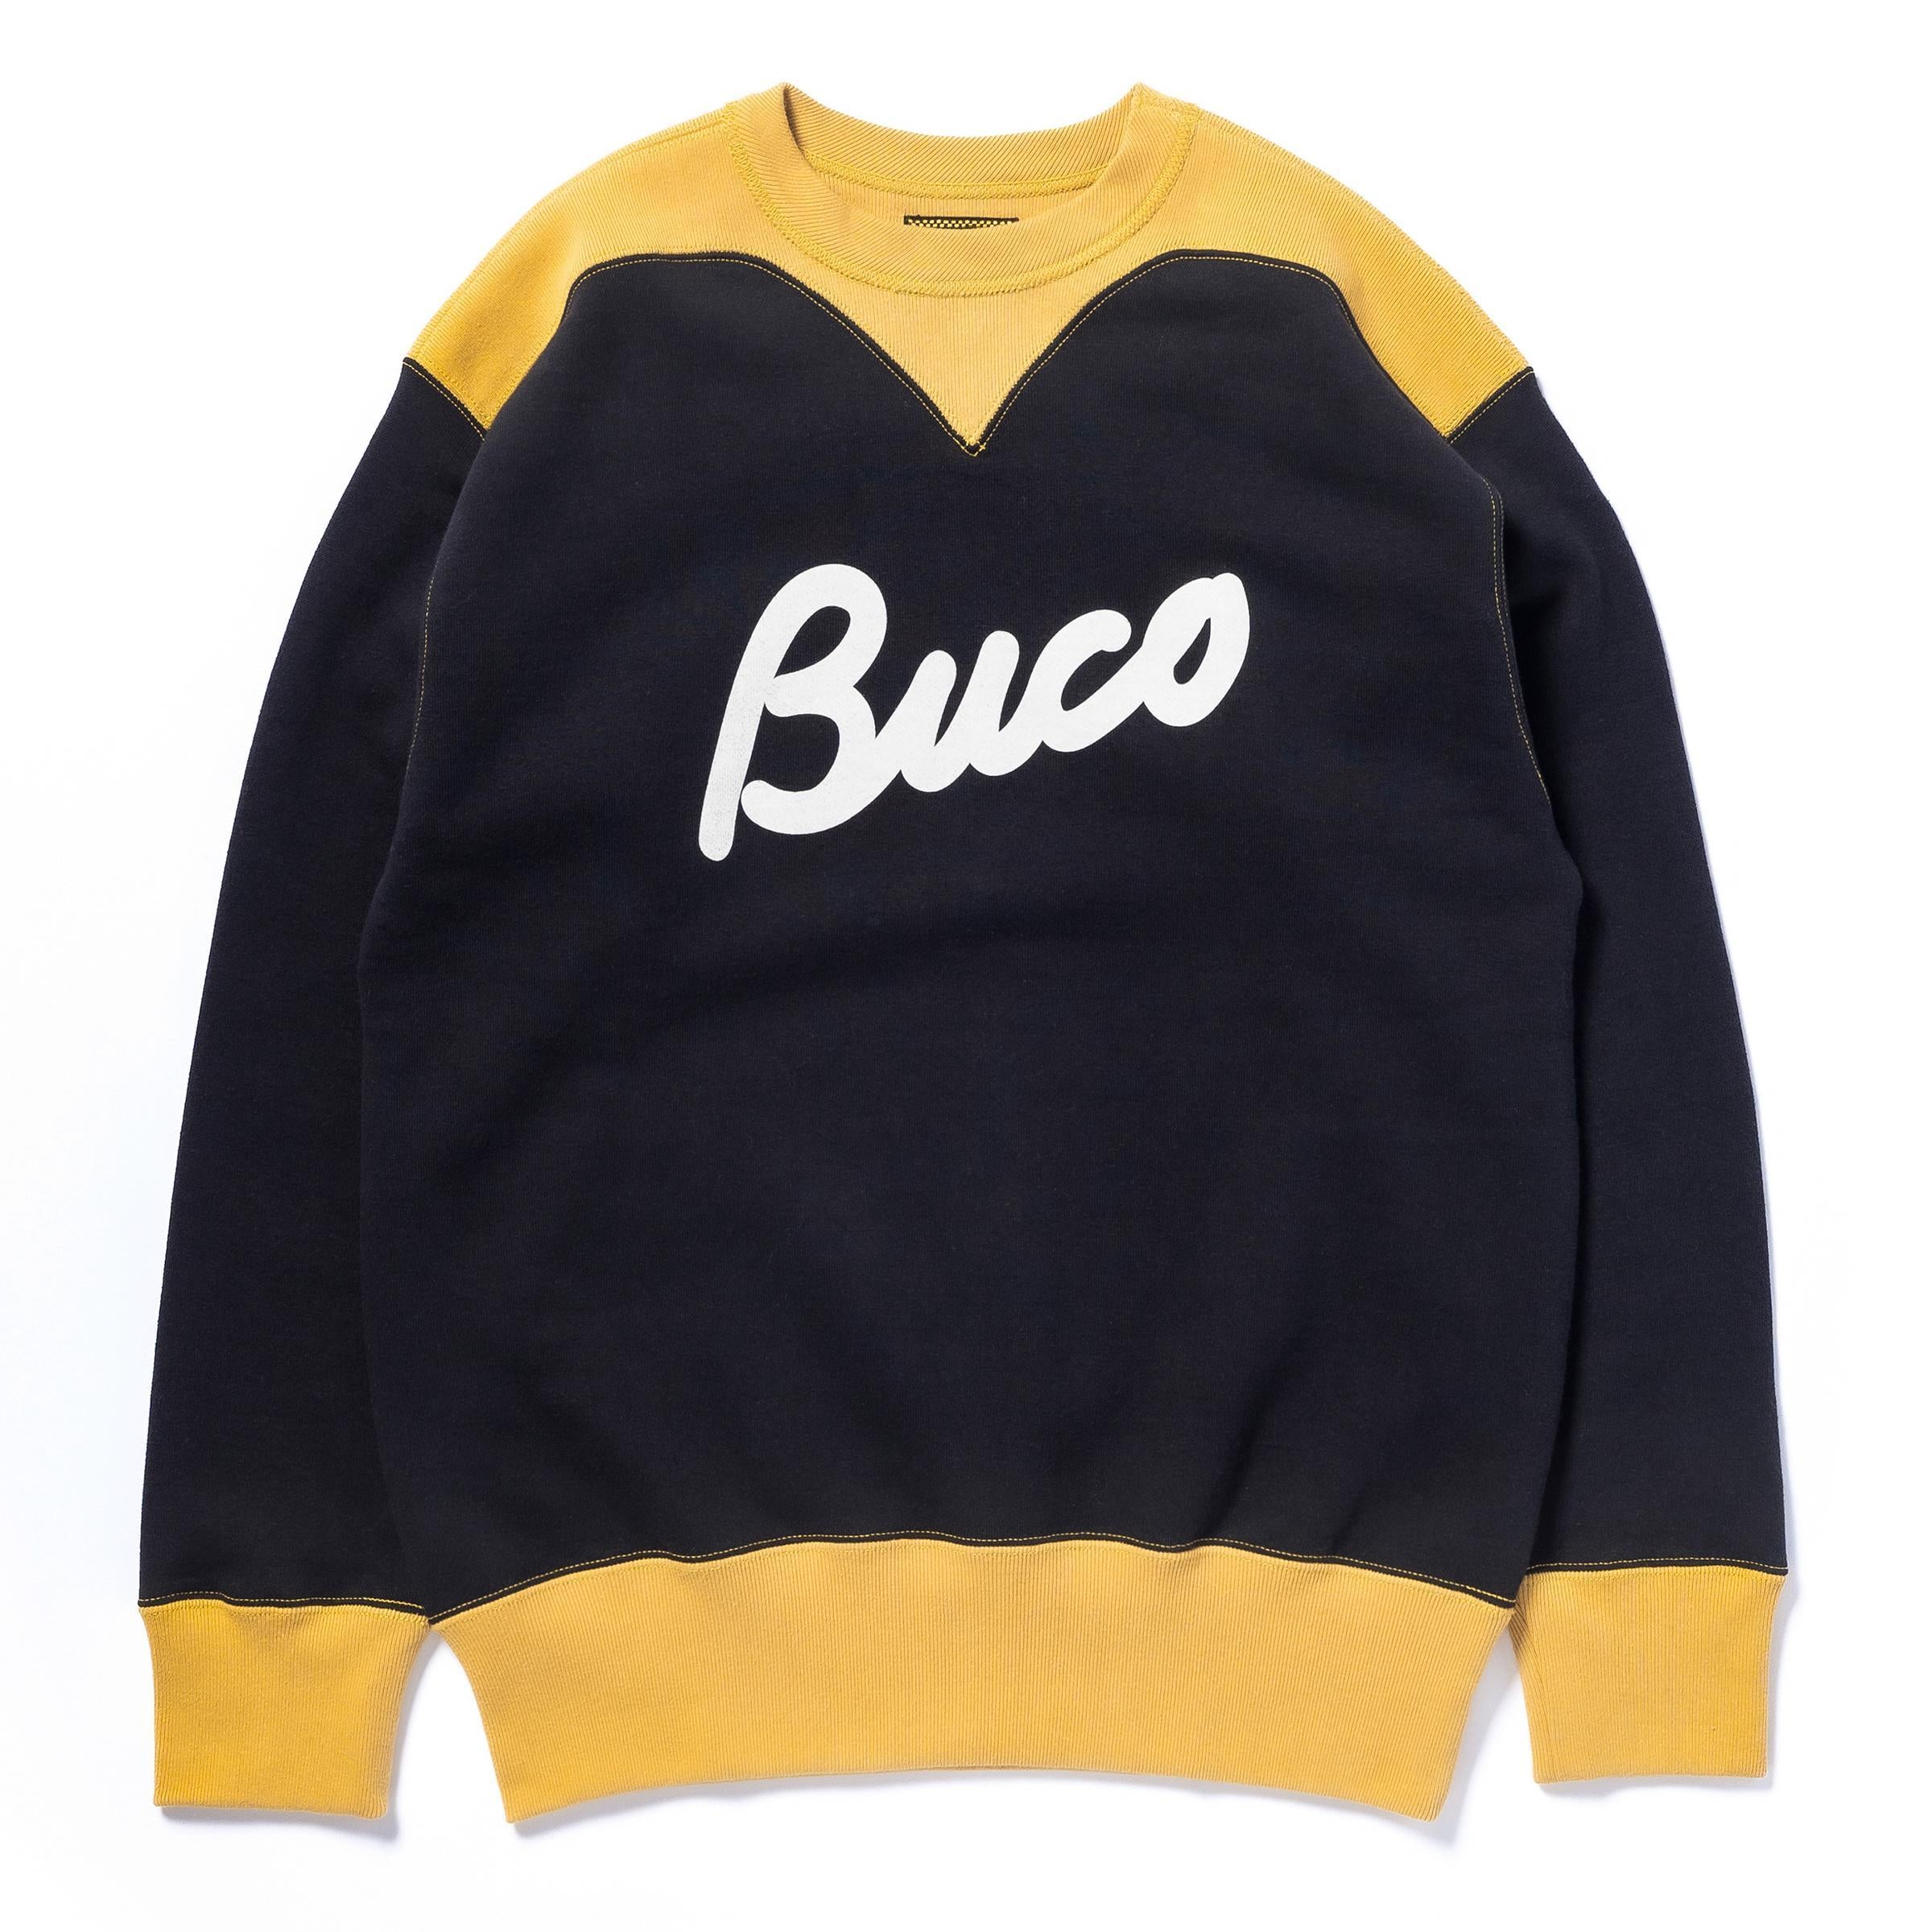 BUCO TWO-TONE SWEATSHIRT / BUCO – TIME AFTER TIME